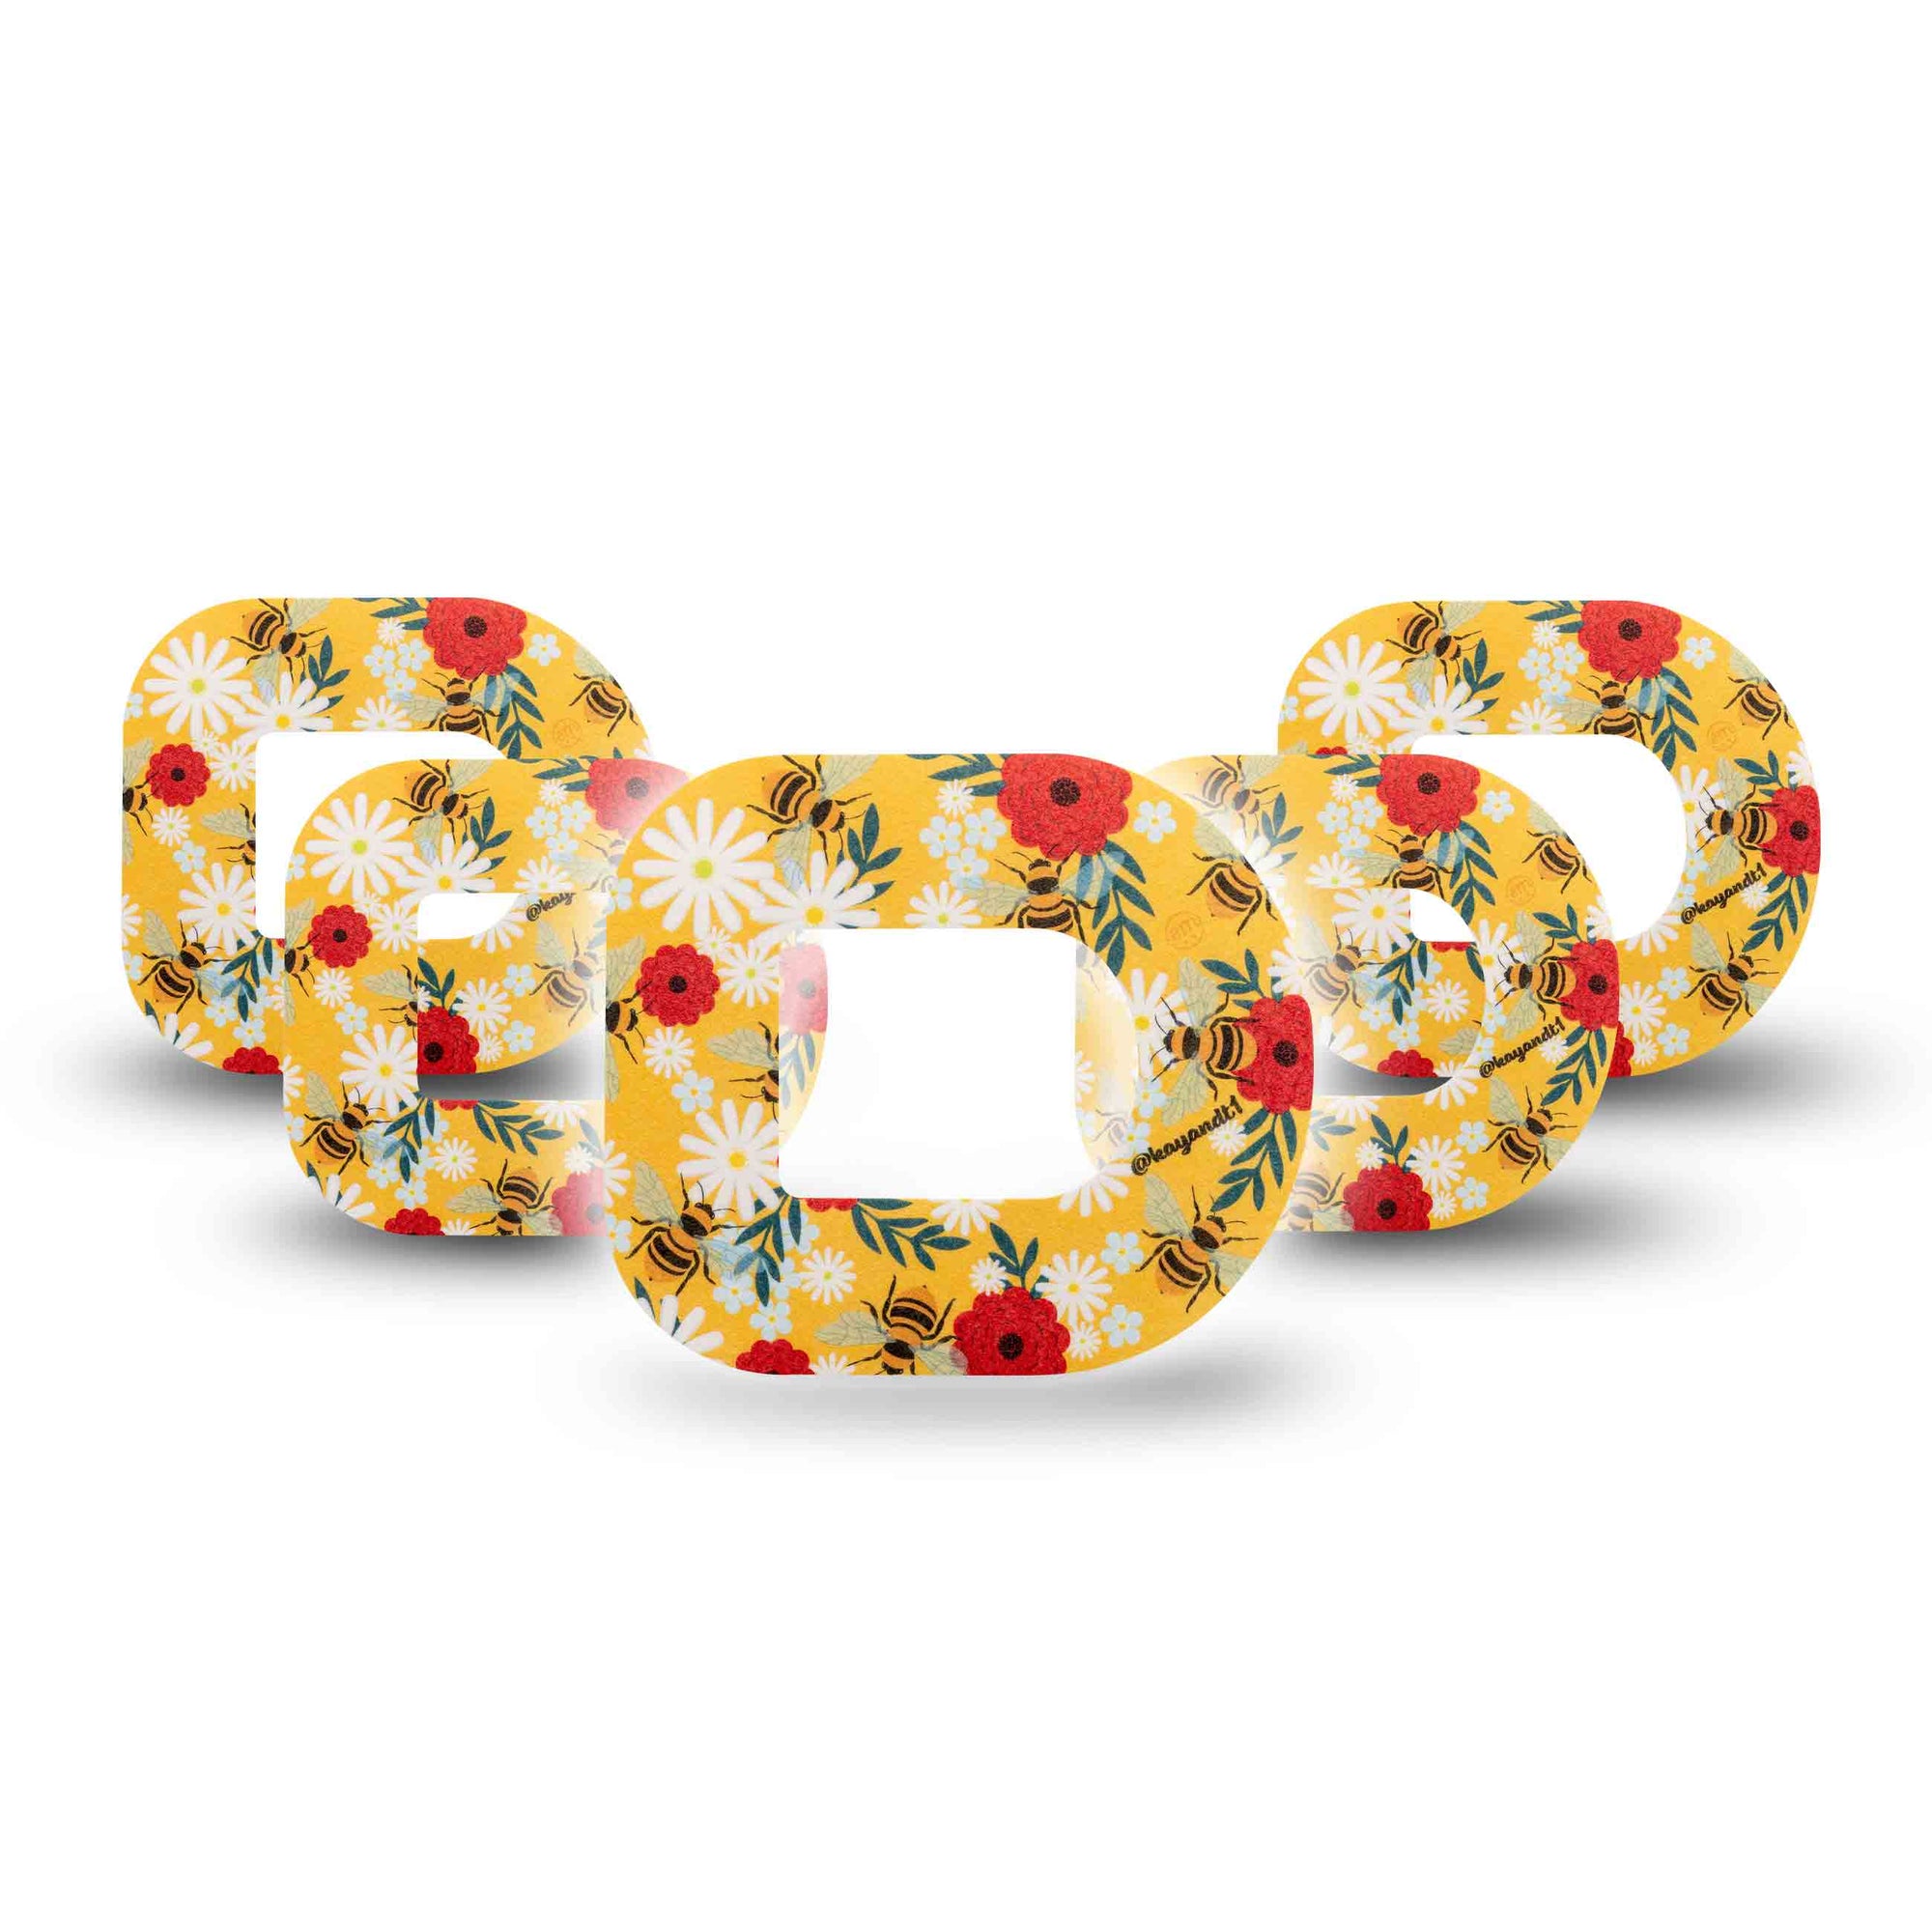 Bees and Flowers Pod Tape 5-Pack